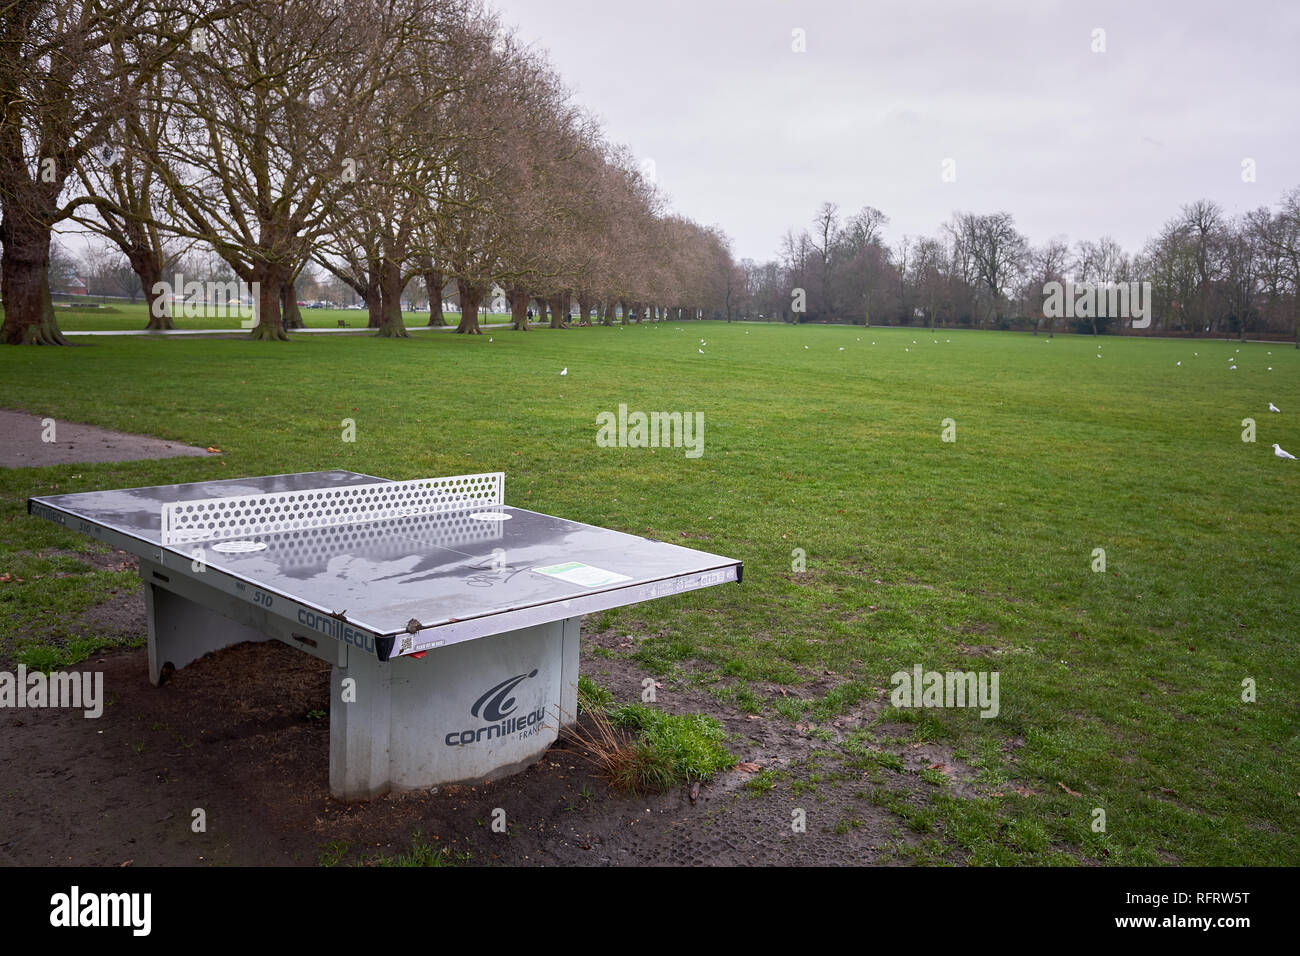 All Weather Concrete And Metal Table Tennis Table On Jesus Green Cambridge England On A Wet Day In The Middle Of Winter Stock Photo Alamy